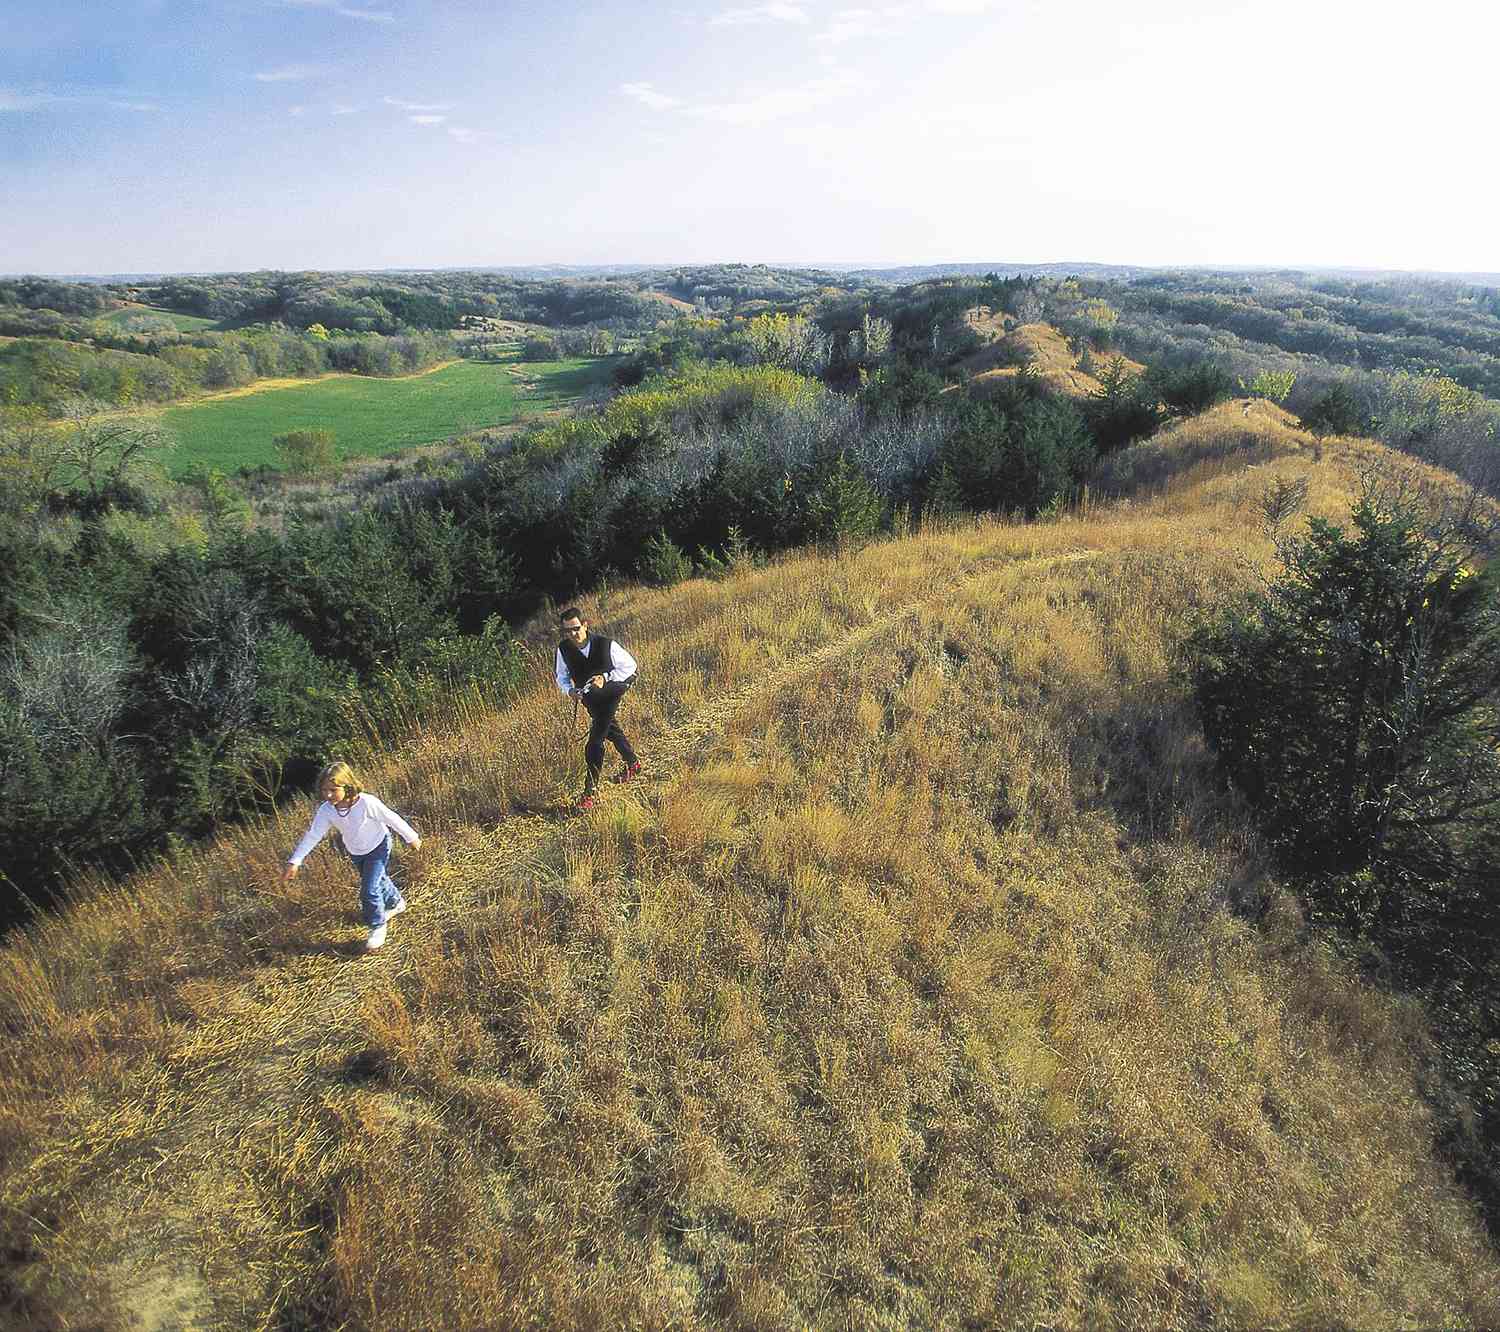 Iowa: Loess Hills National Scenic Byway